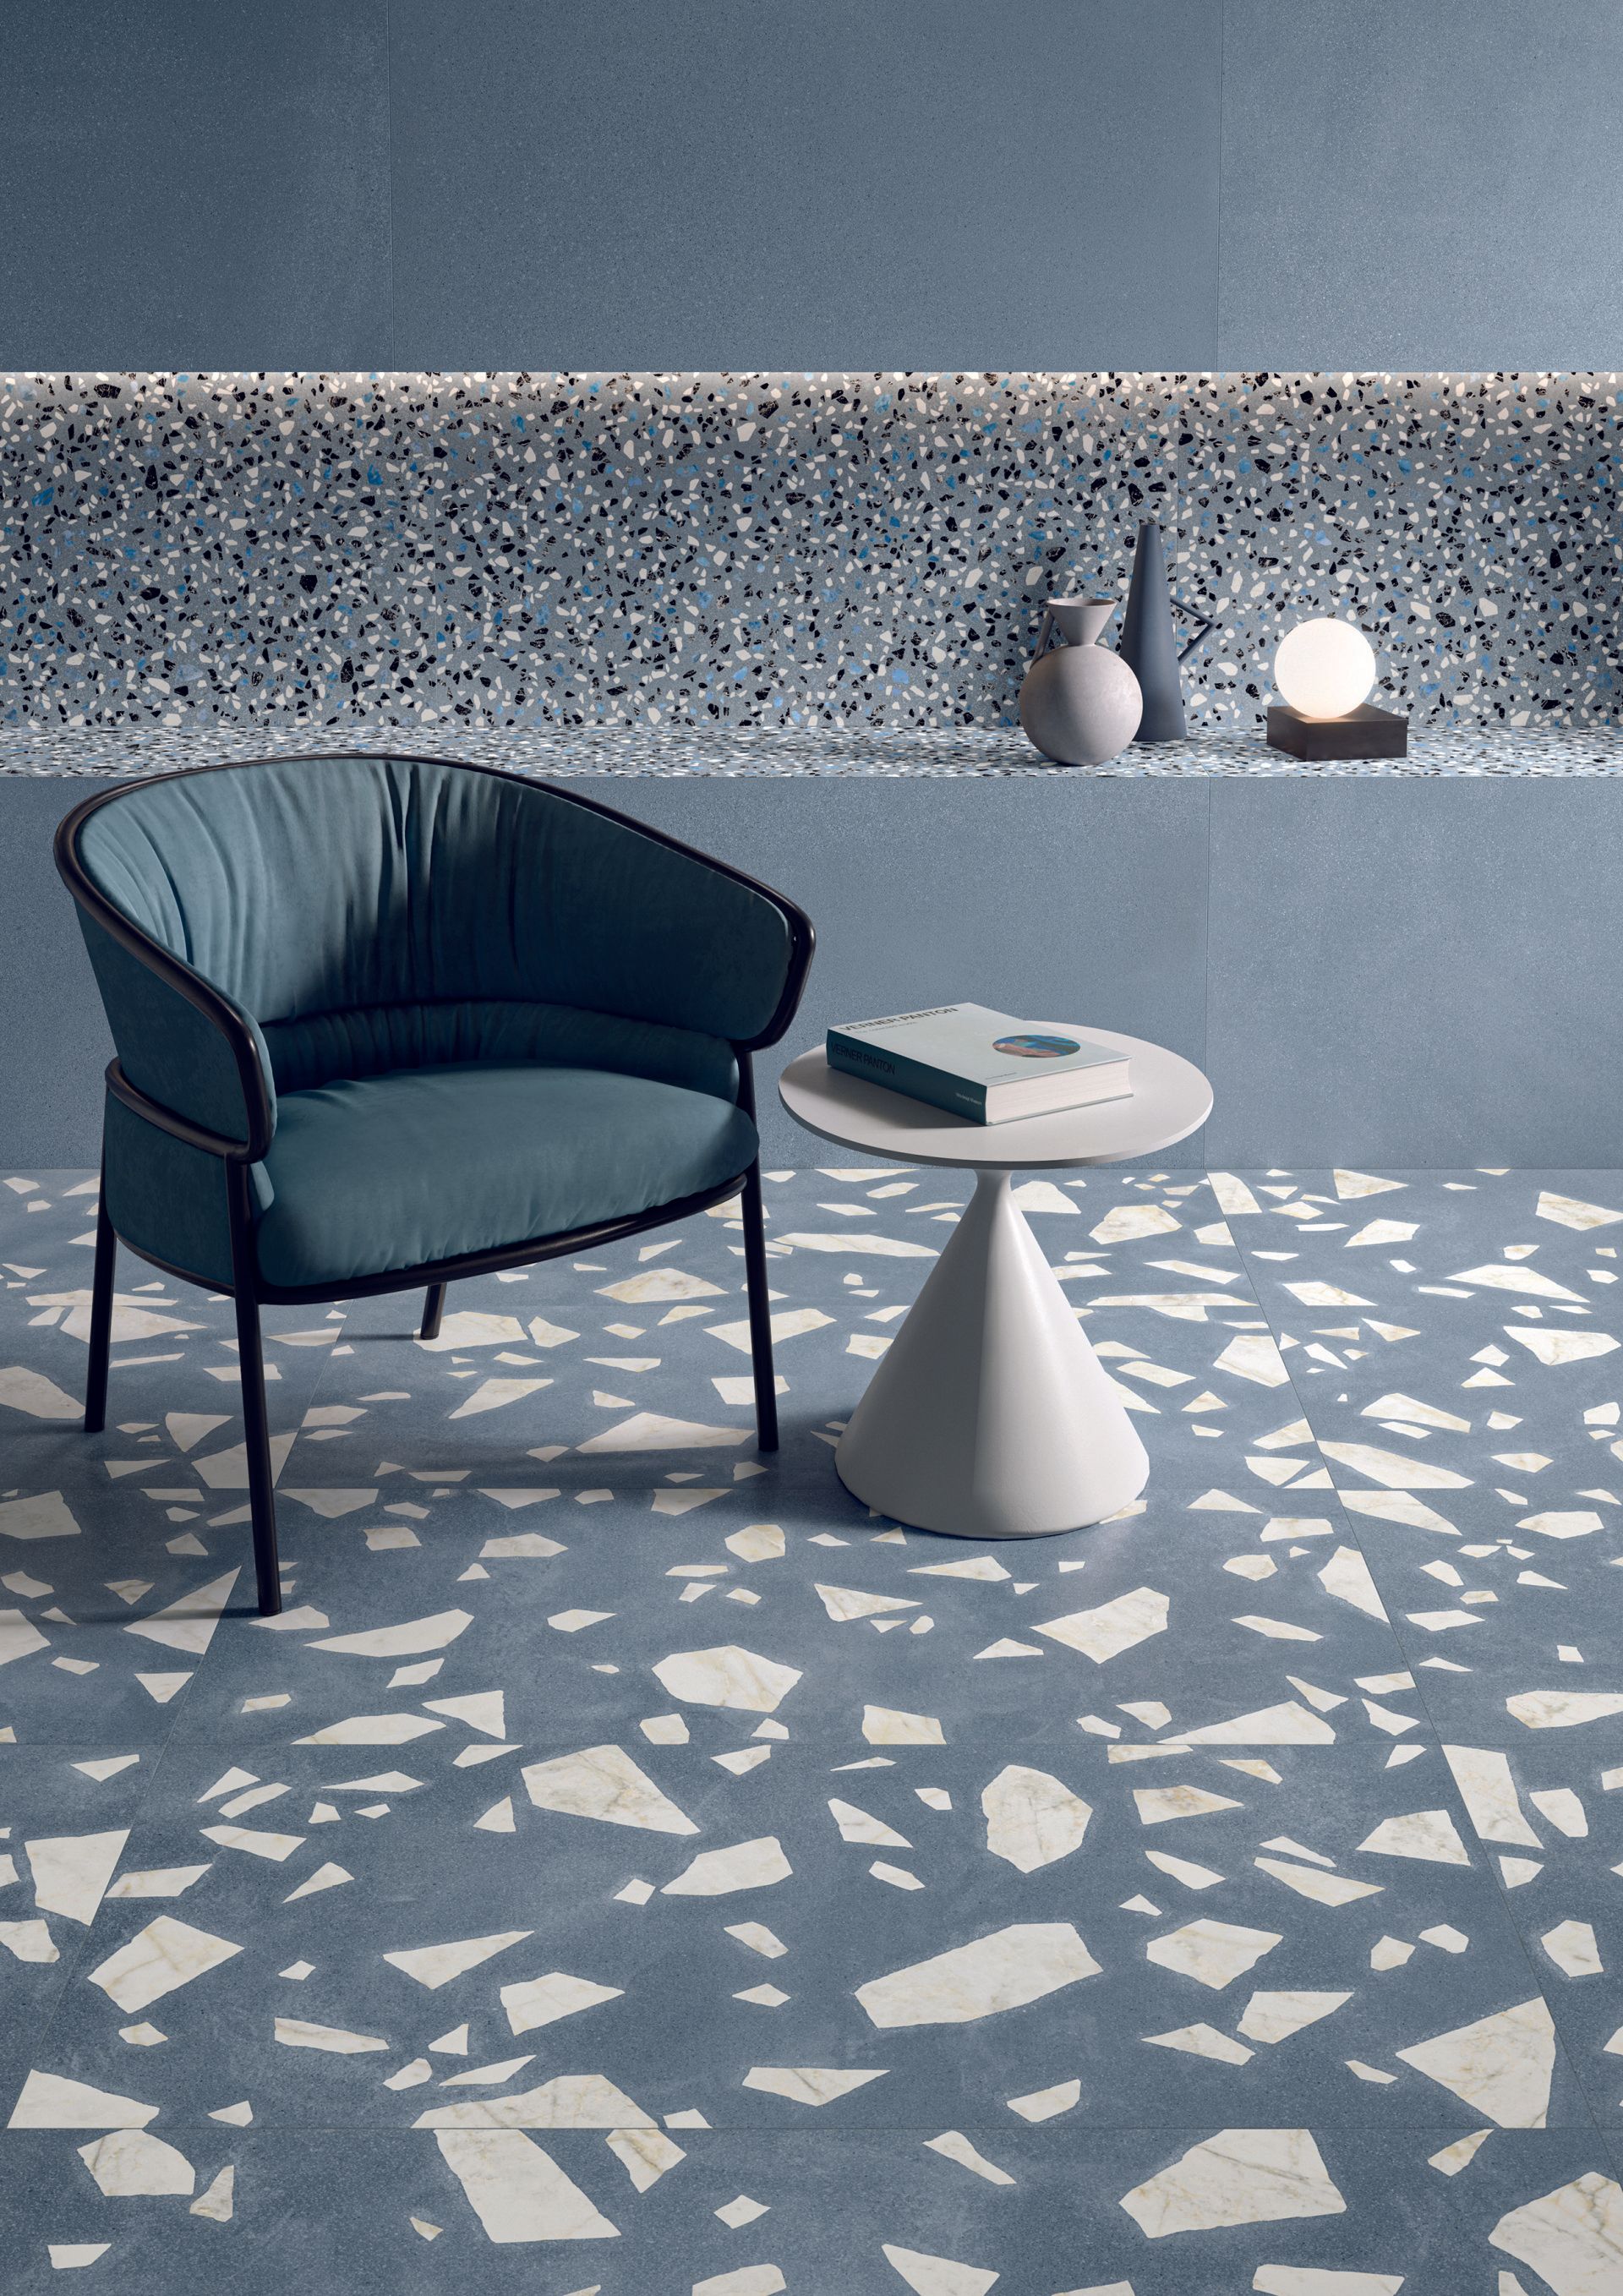 terrazzo tiles , blue cushion chair with a white small coffee table ,